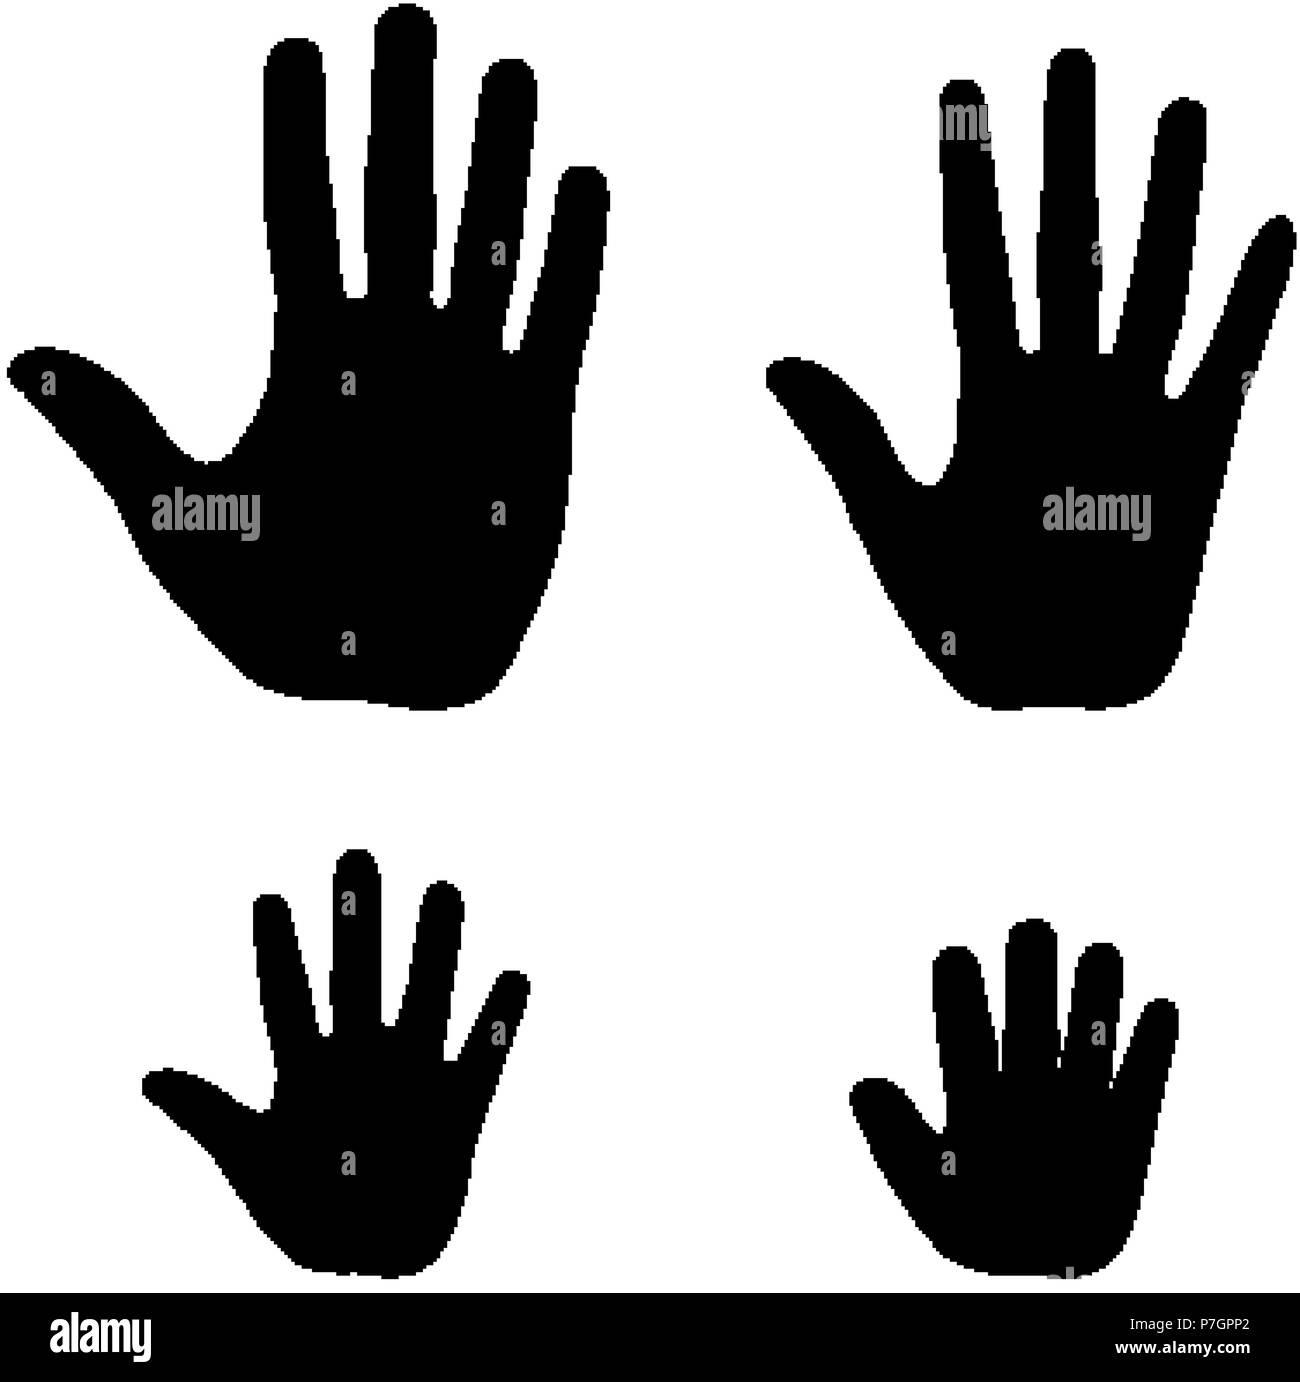 Set of human open palm hands. Man, woman, teenager and a baby handbreadth icons Stock Vector